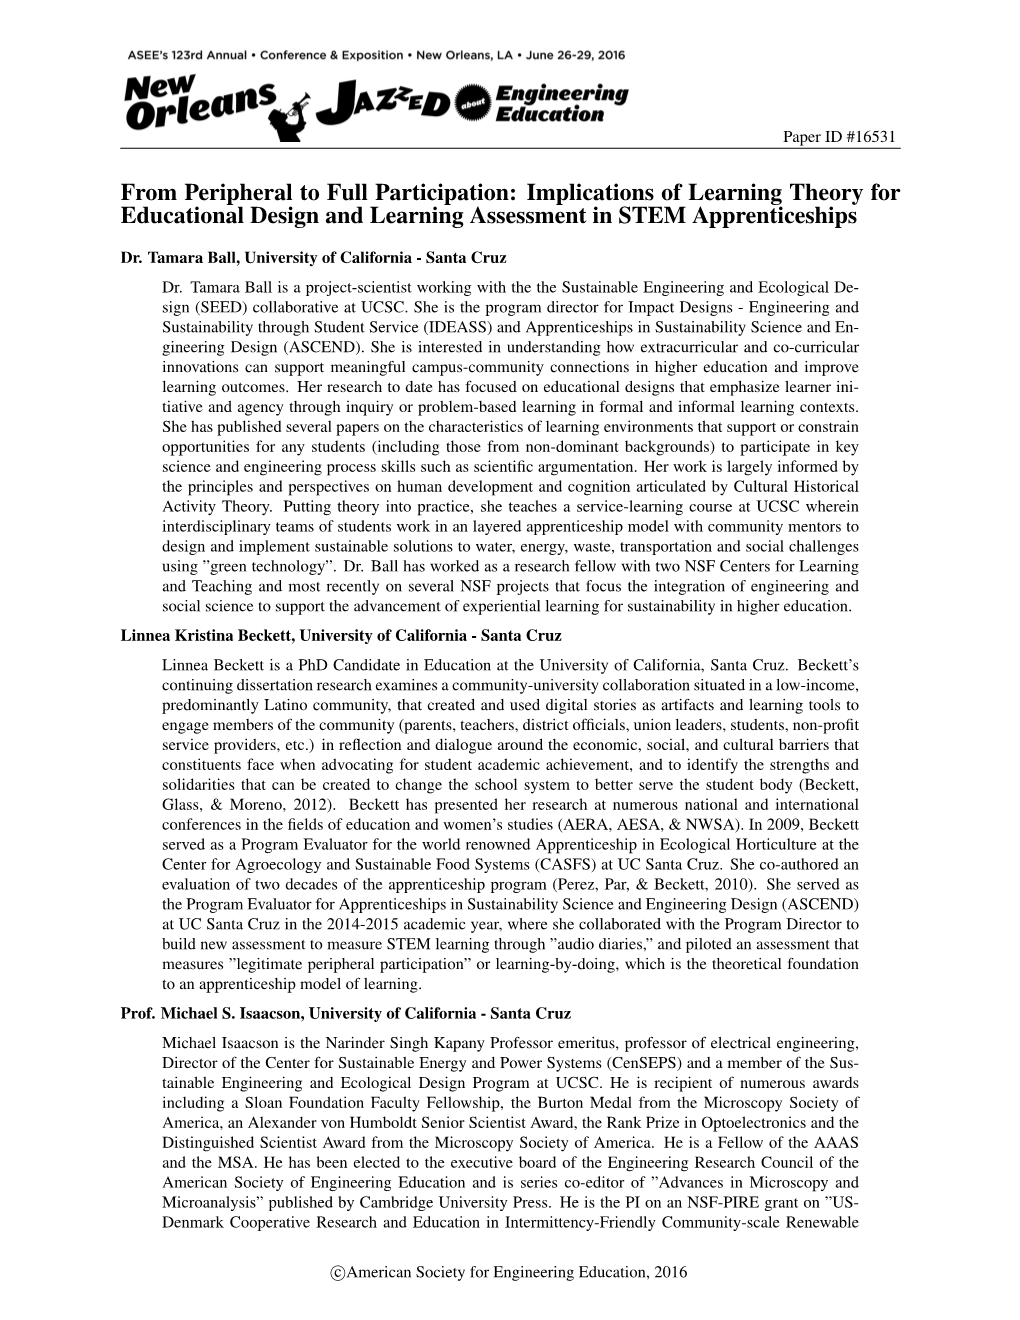 From Peripheral to Full Participation: Implications of Learning Theory for Educational Design and Learning Assessment in STEM Apprenticeships